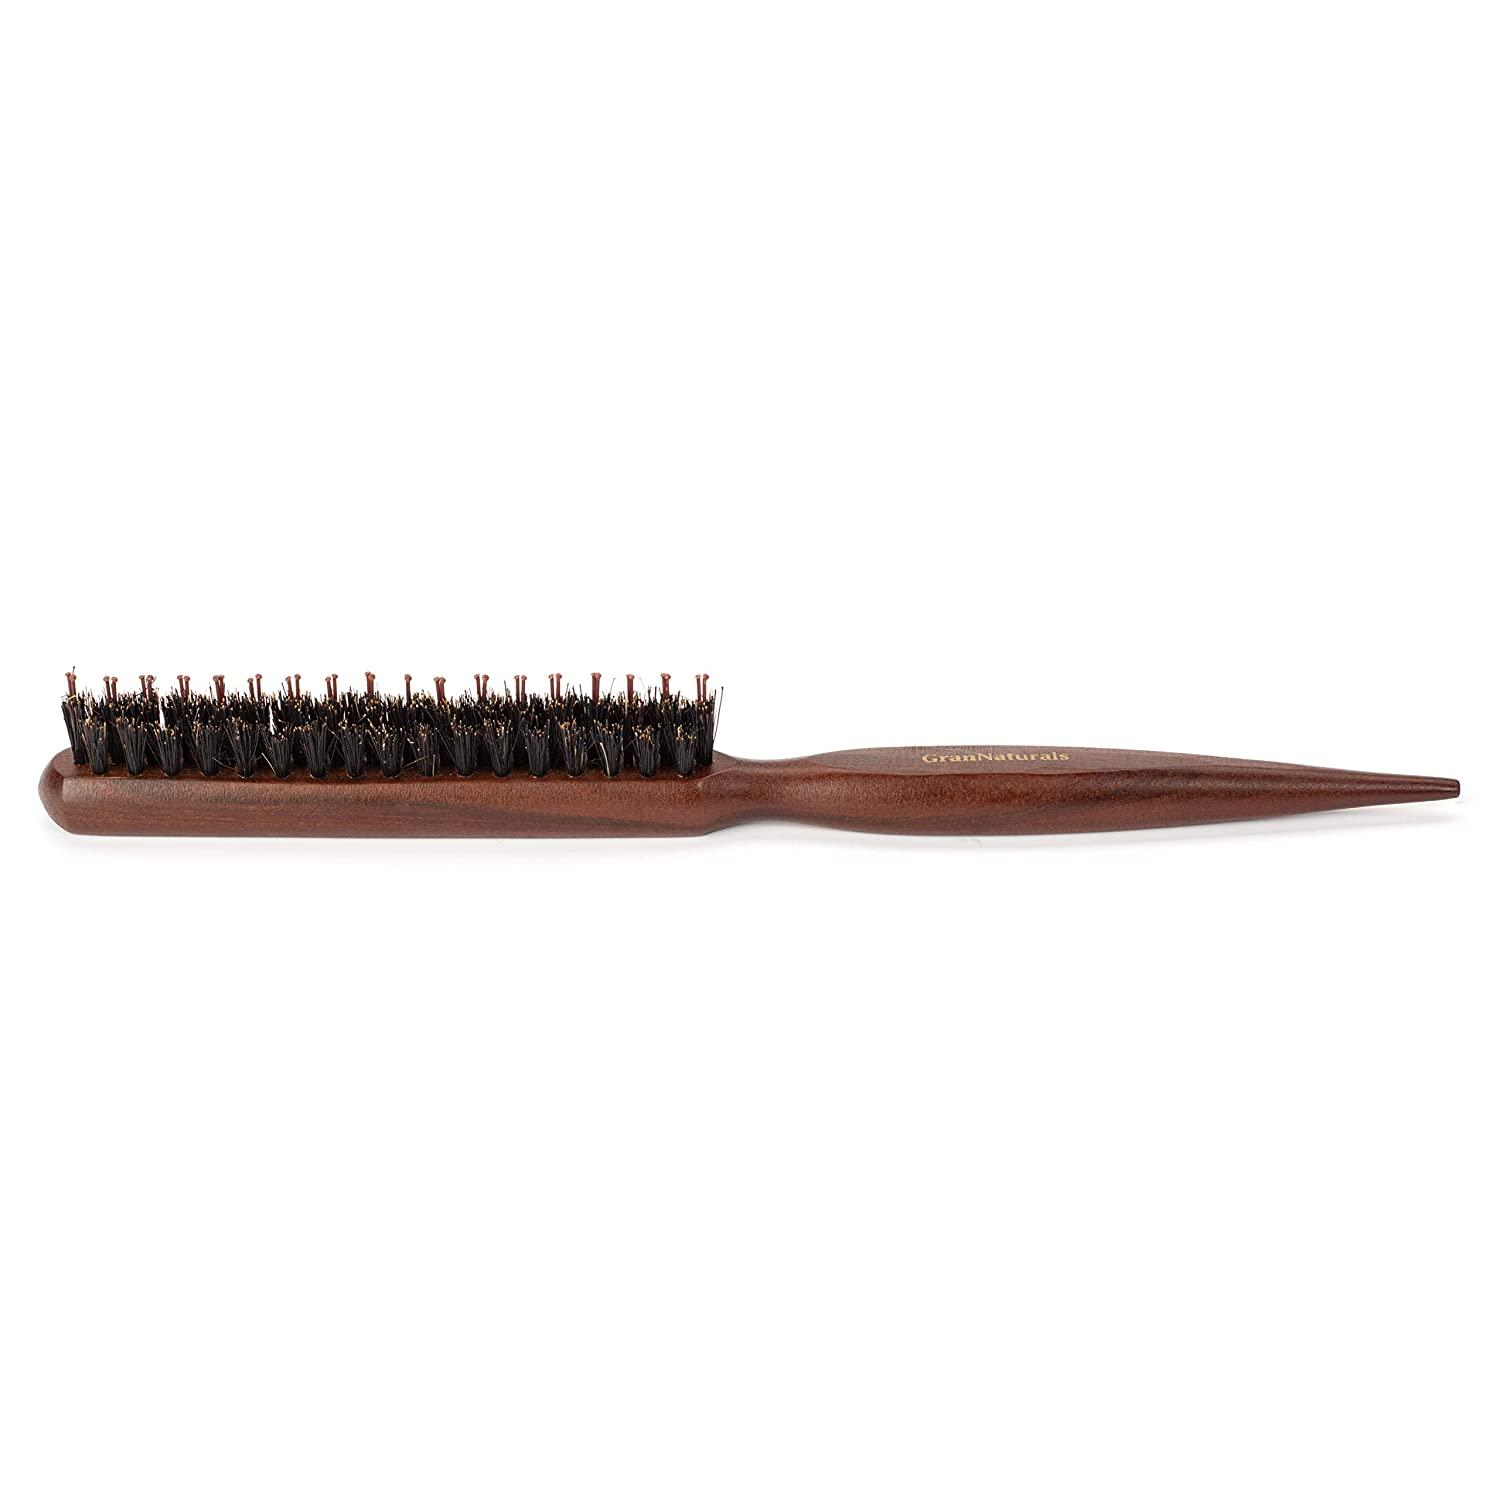 Boar And Nylon Bristle Teasing Brush Teasing Comb With Rat Tail Pick For Hair Sectioning For Edge